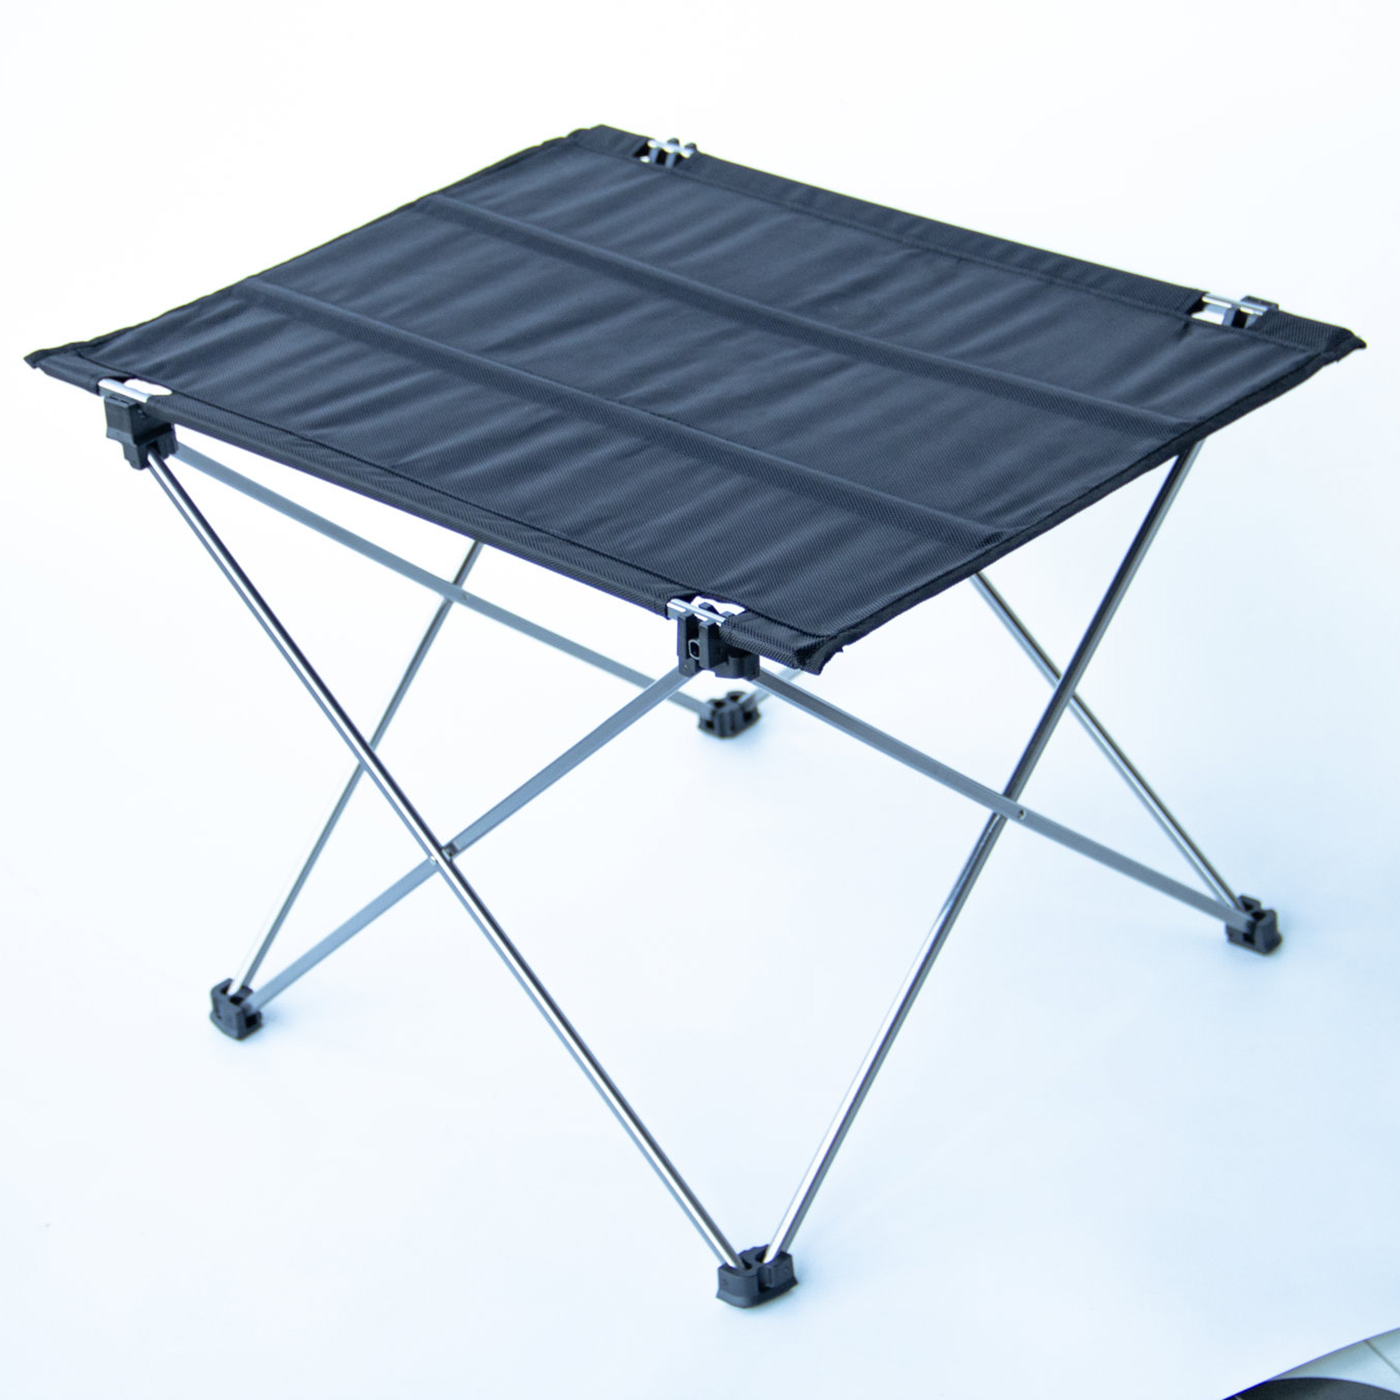 Nylon Folding Table With Carrying Bag3